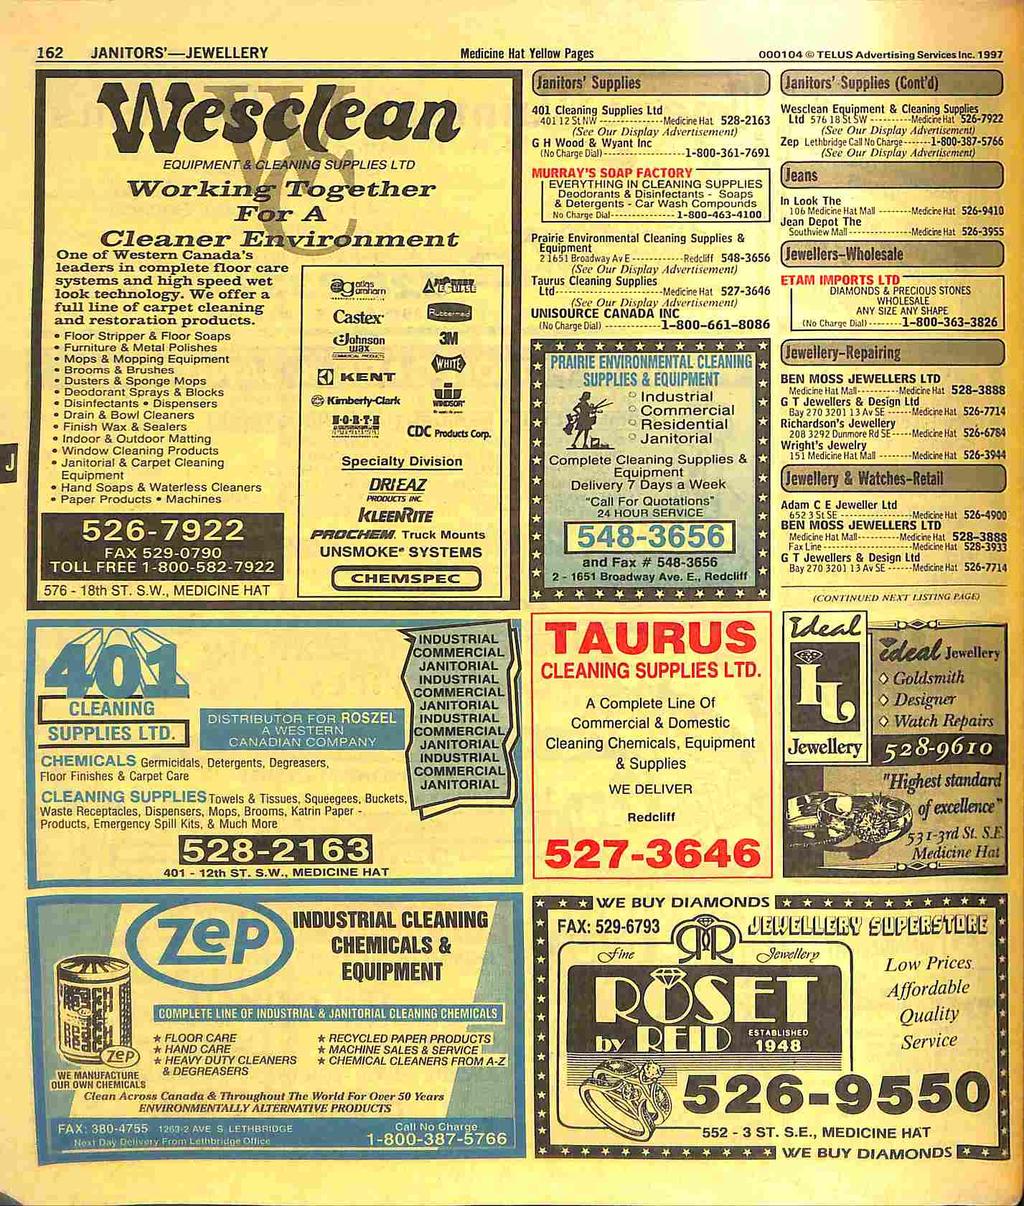 162 JANITORS' JEWELLERY Medicine Hat Yellow Pages 000104 & TELUS Advertising Services Inc. 1997 EQUIPMENn^.GLBWINq SUPPLIES LTD Worlxin^ 'Fog^ther F0r A.